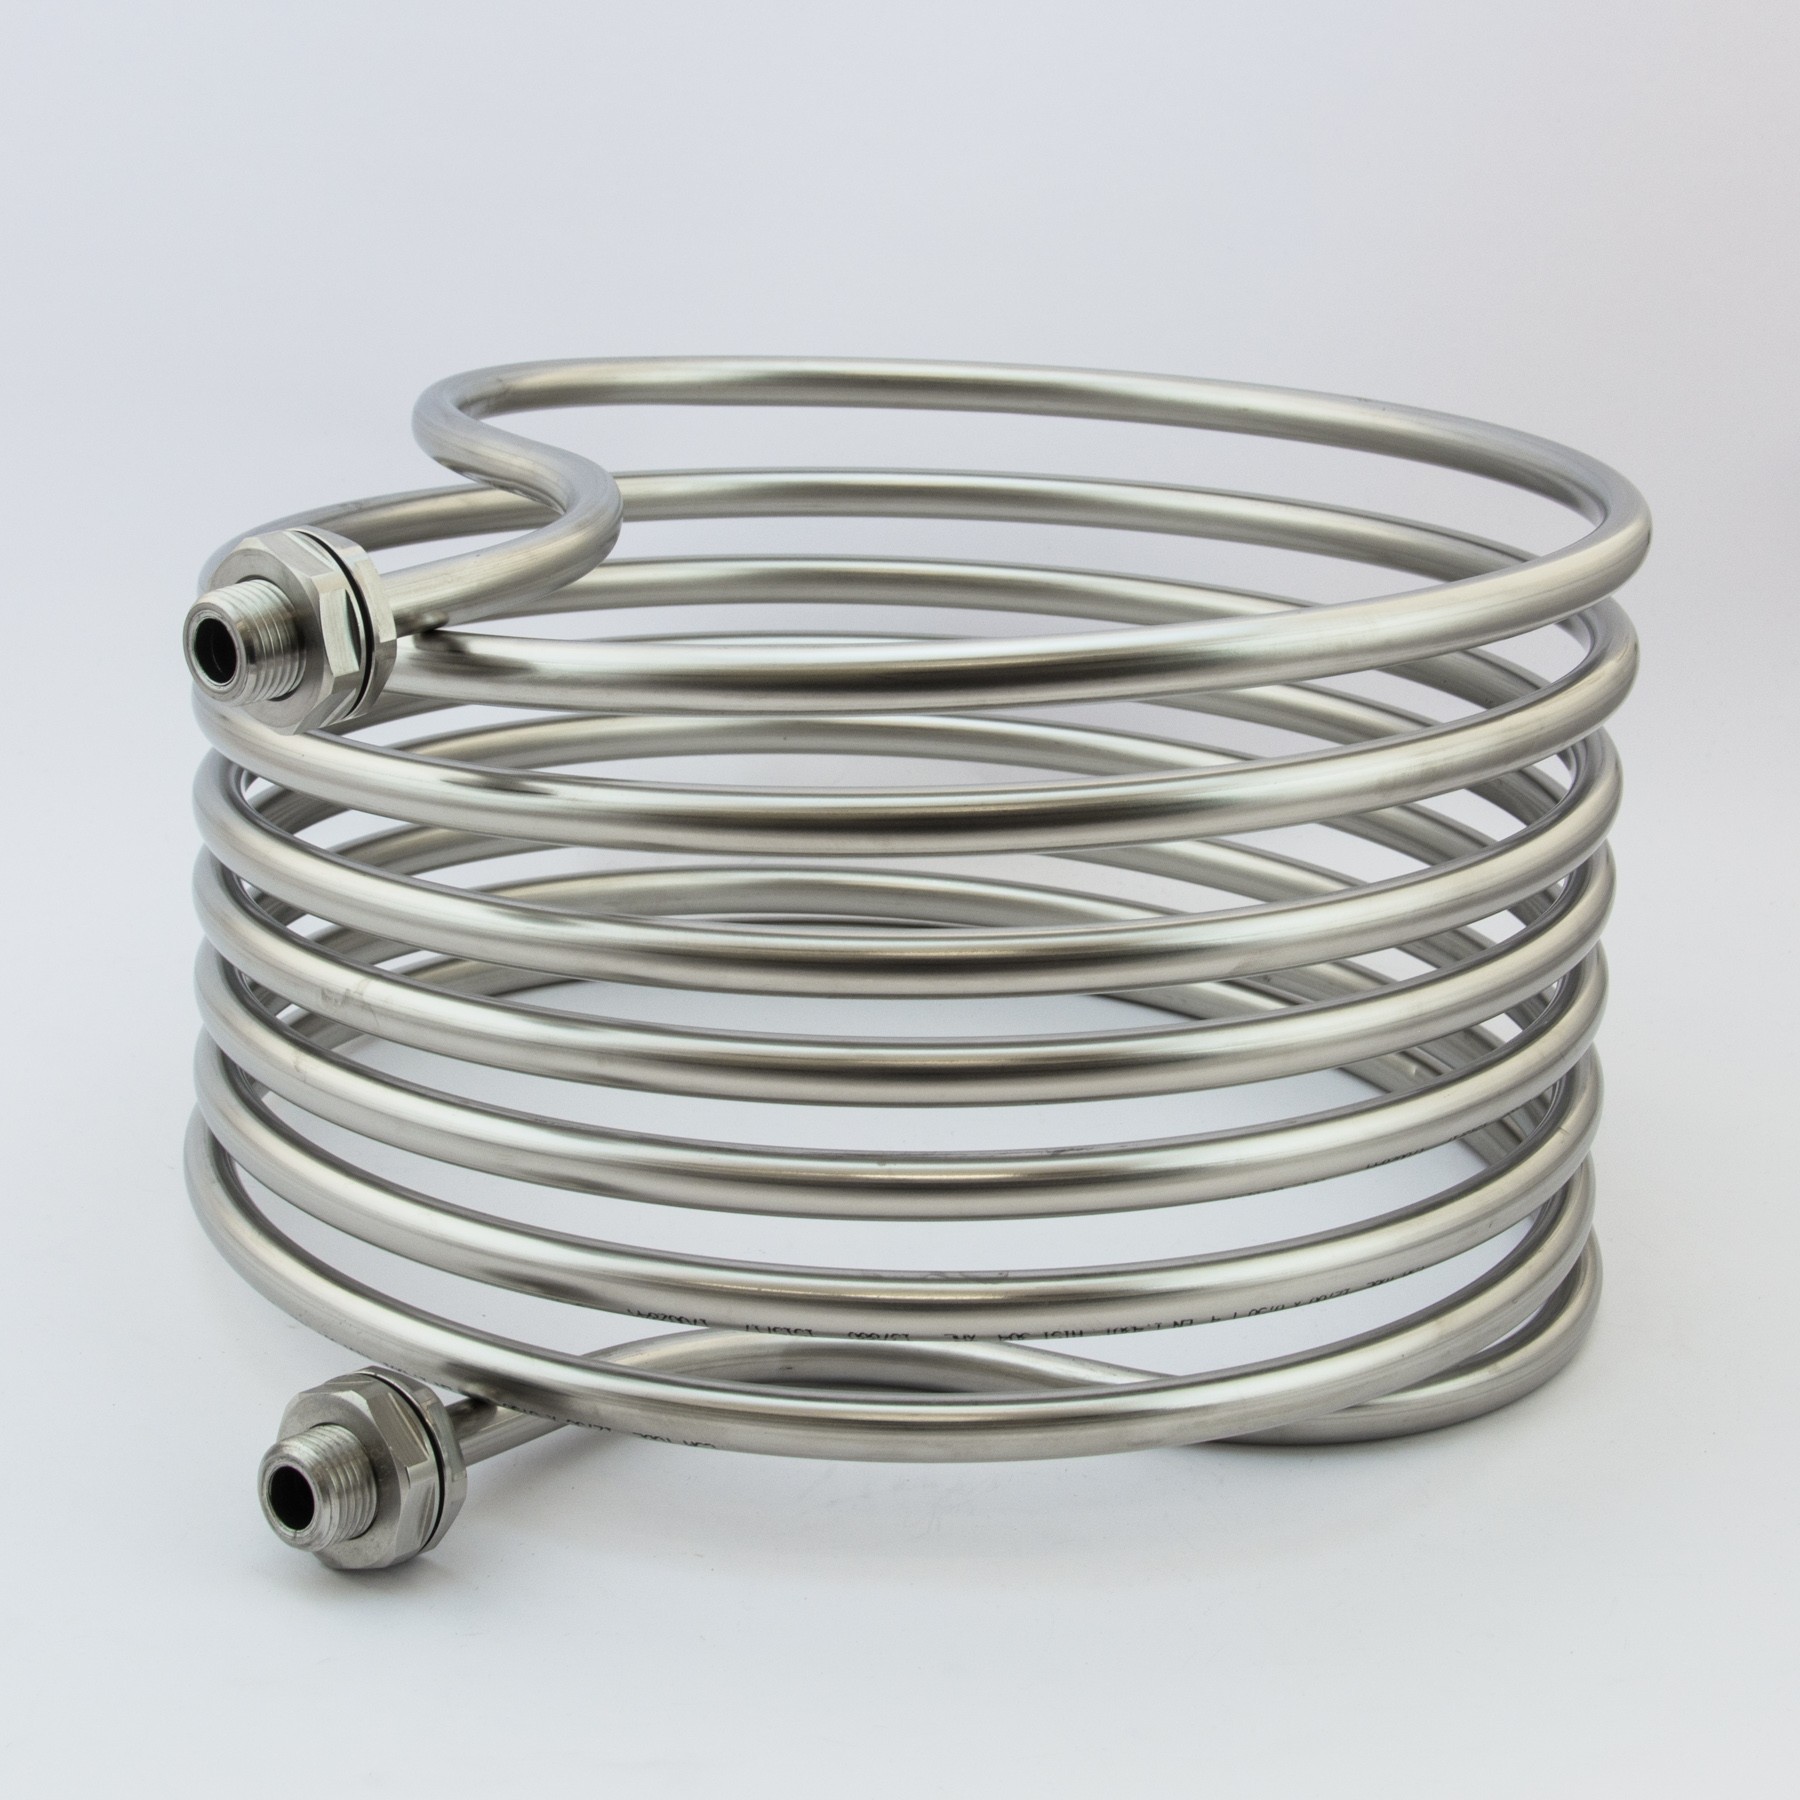 Stainless Steel HERMS Coil with NPT Fittings - 30 cm - 7.5m